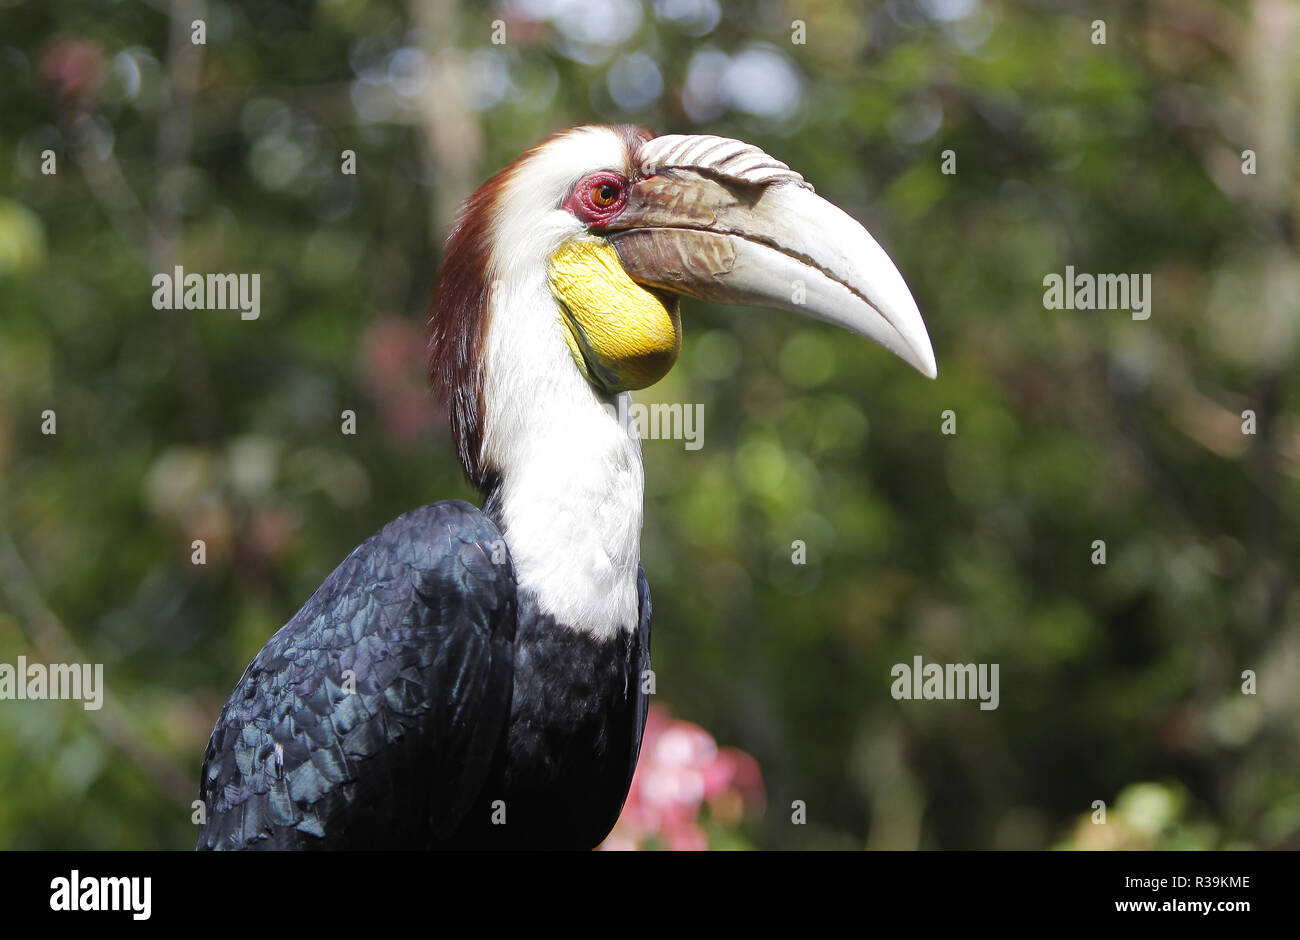 Bogor, West Java, Indonesia. 22nd Nov, 2018. A horn bill (Buceros bicornis)  is seen in the Taman Safari  park zoo (Taman Safari) Indonesia  has a large collection of wild and rare